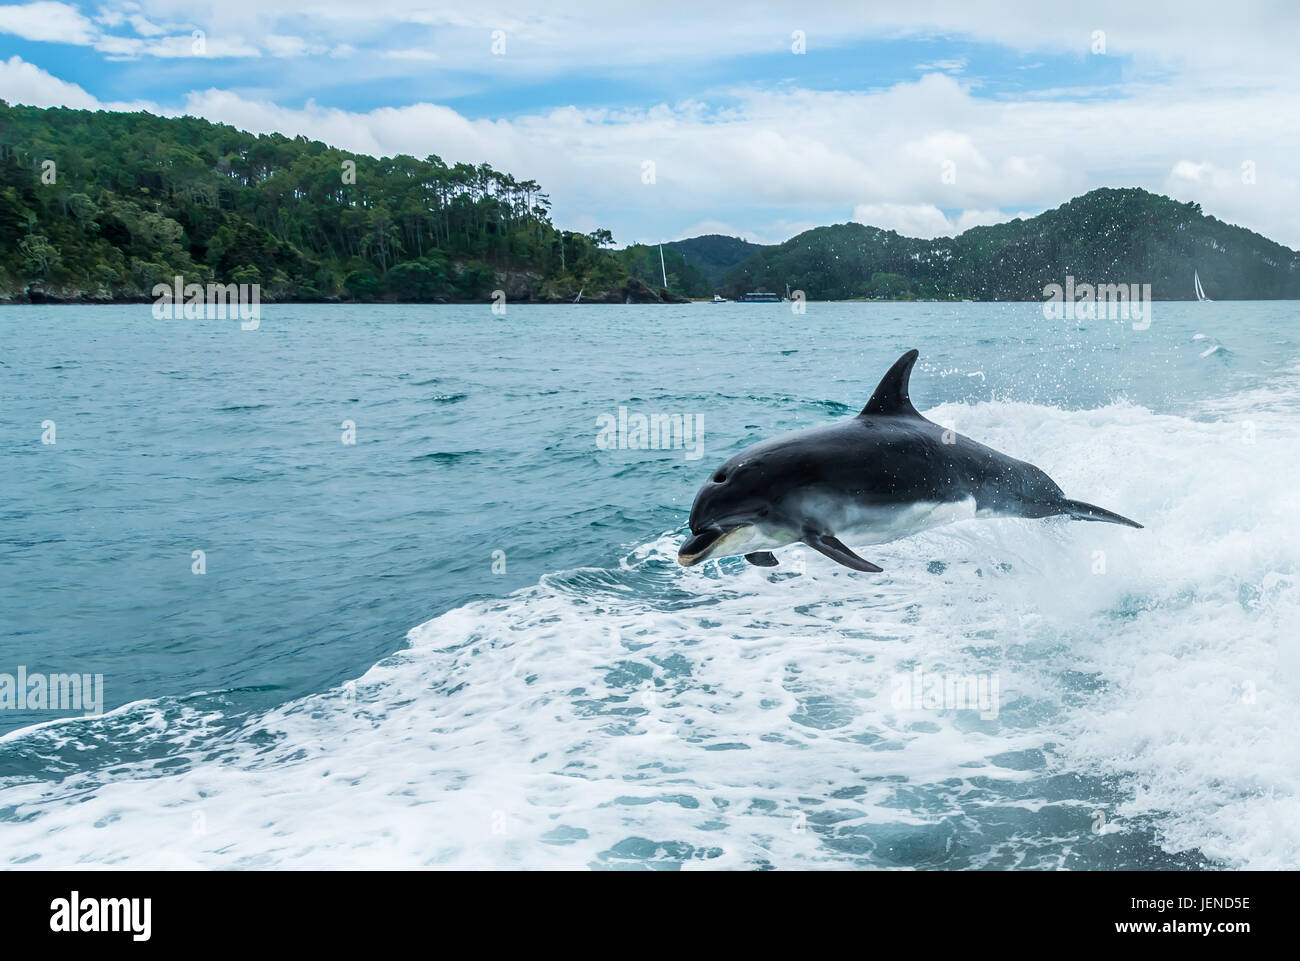 Bottlenose dolphin leaping out of sea, Bay of Islands, North Island, New Zealand Stock Photo